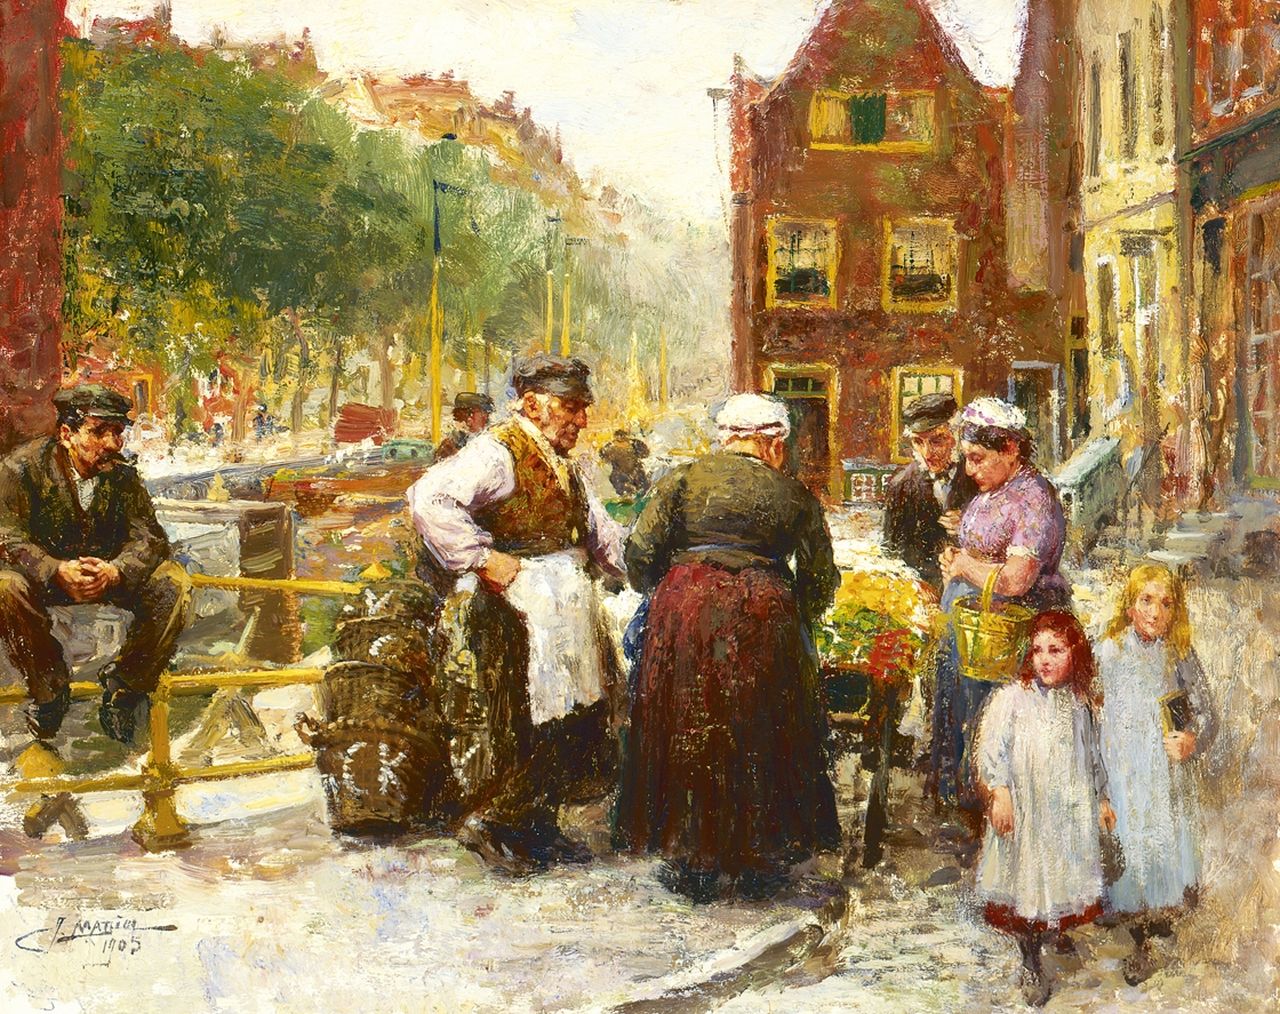 Madiol J.  | Jacob Madiol, Jewish district, Amsterdam, oil on panel 36.7 x 46.0 cm, signed l.l. and dated 1905